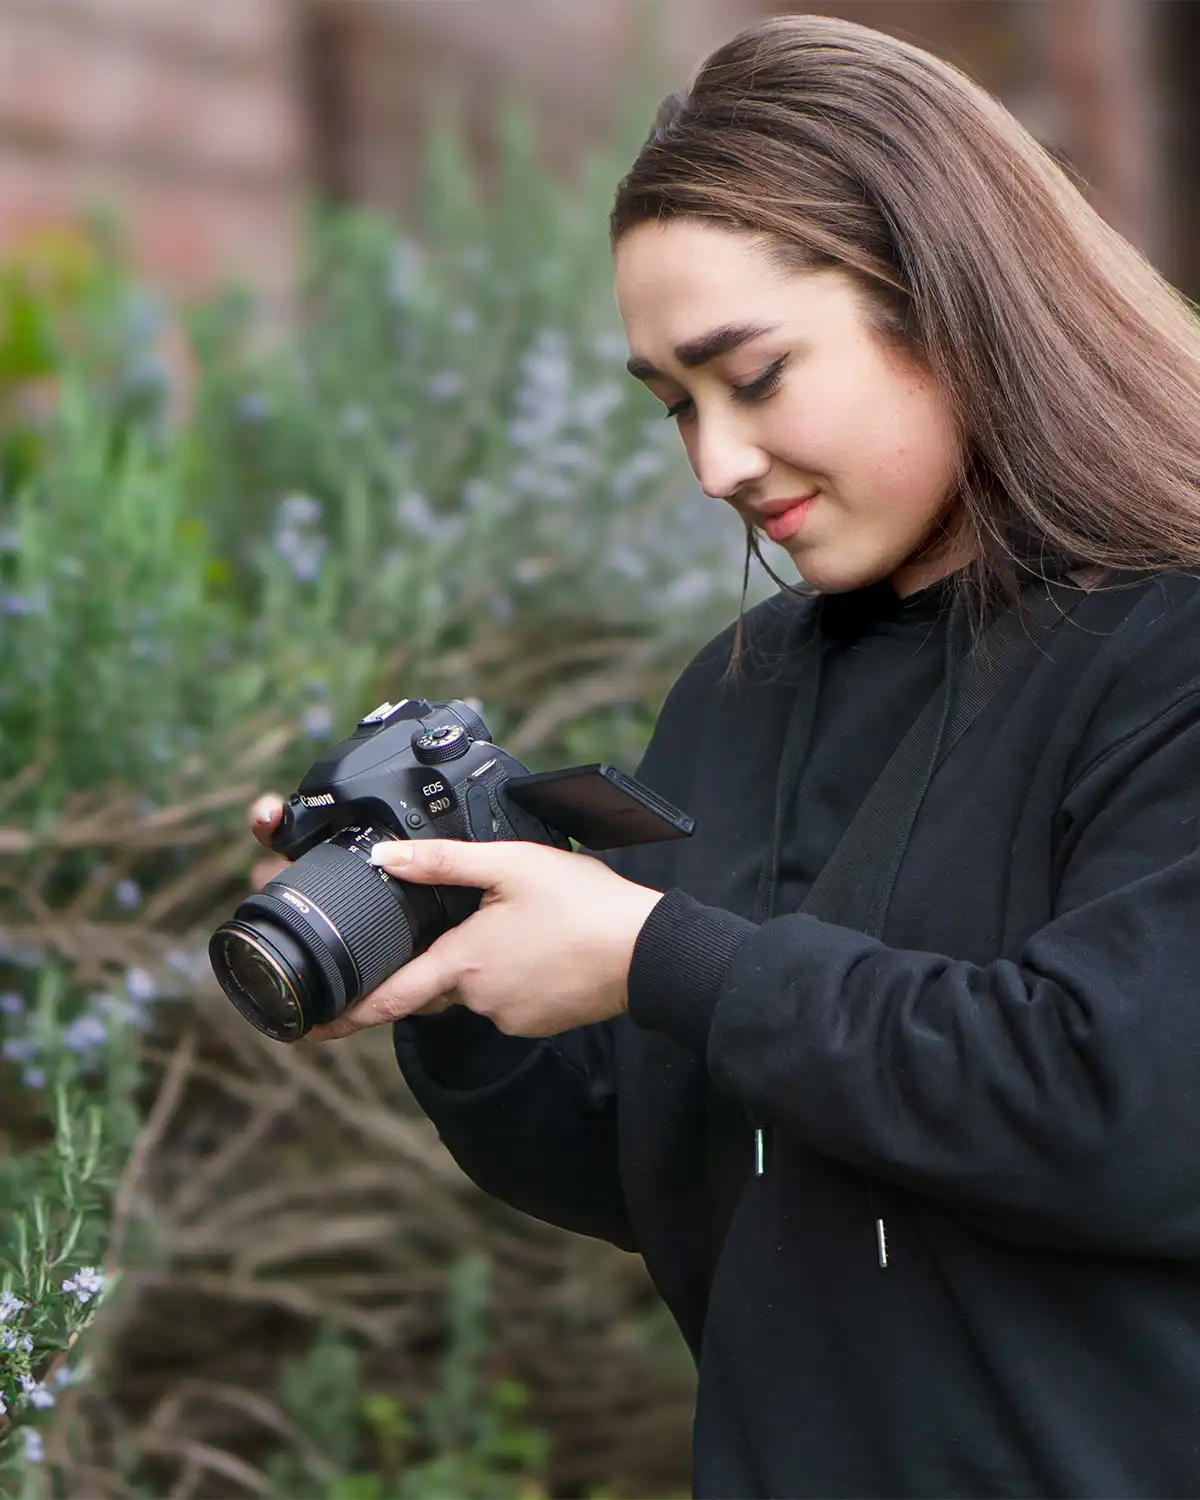 a female photographer with a digital camera taking photos of plants in a garden wearing a black hoodie jumper